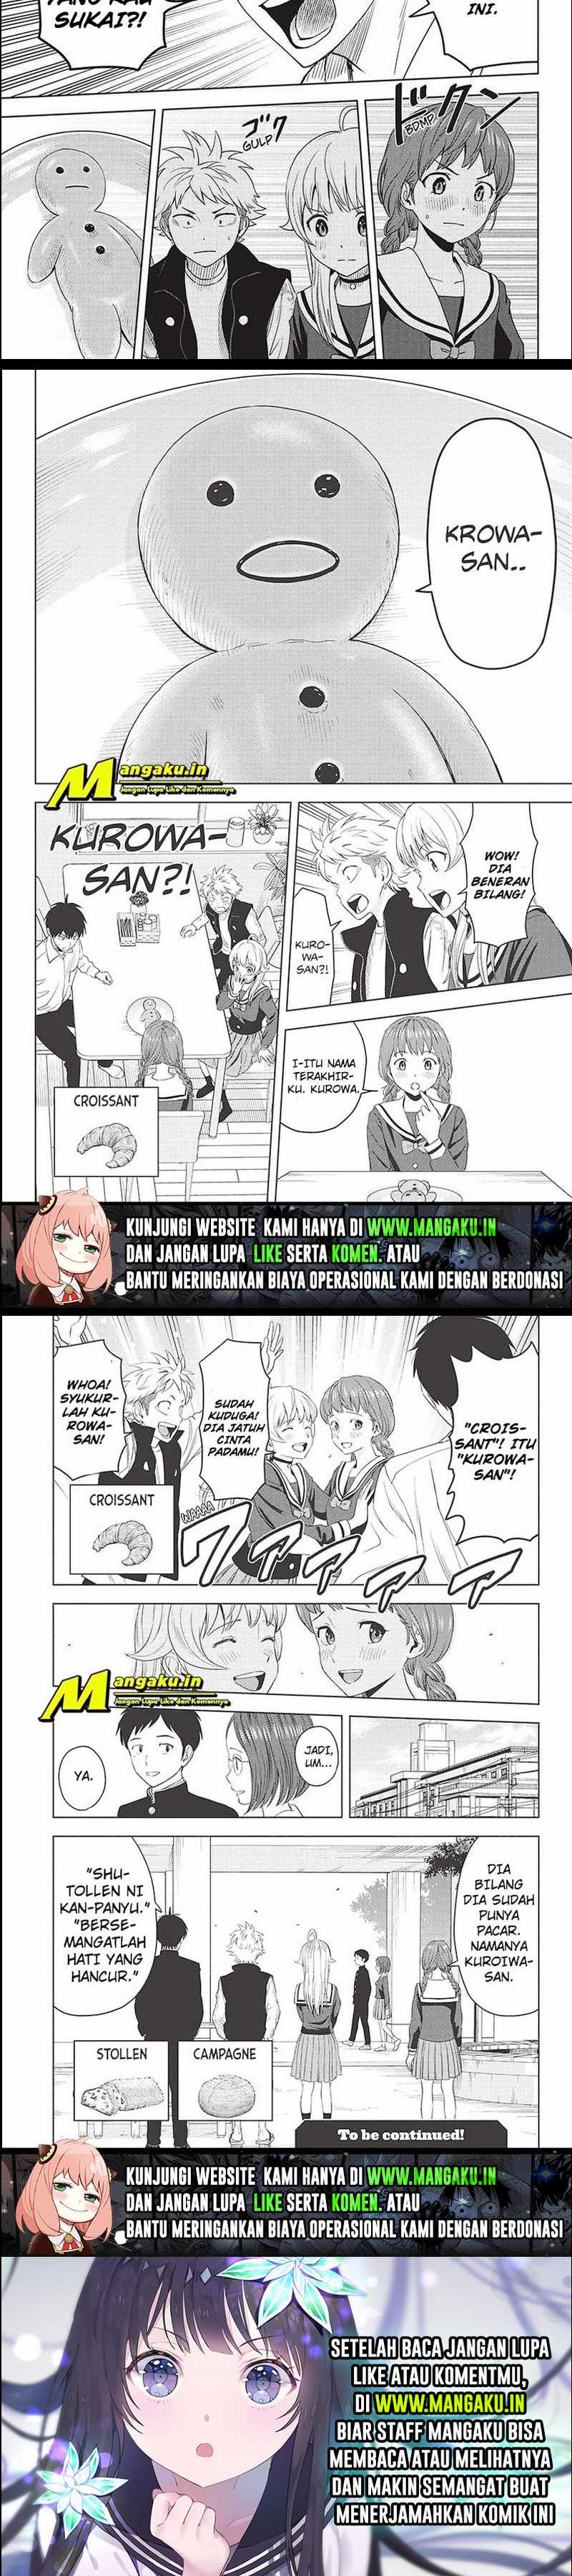 Witch Watch Chapter 77 Bahasa Indonesia